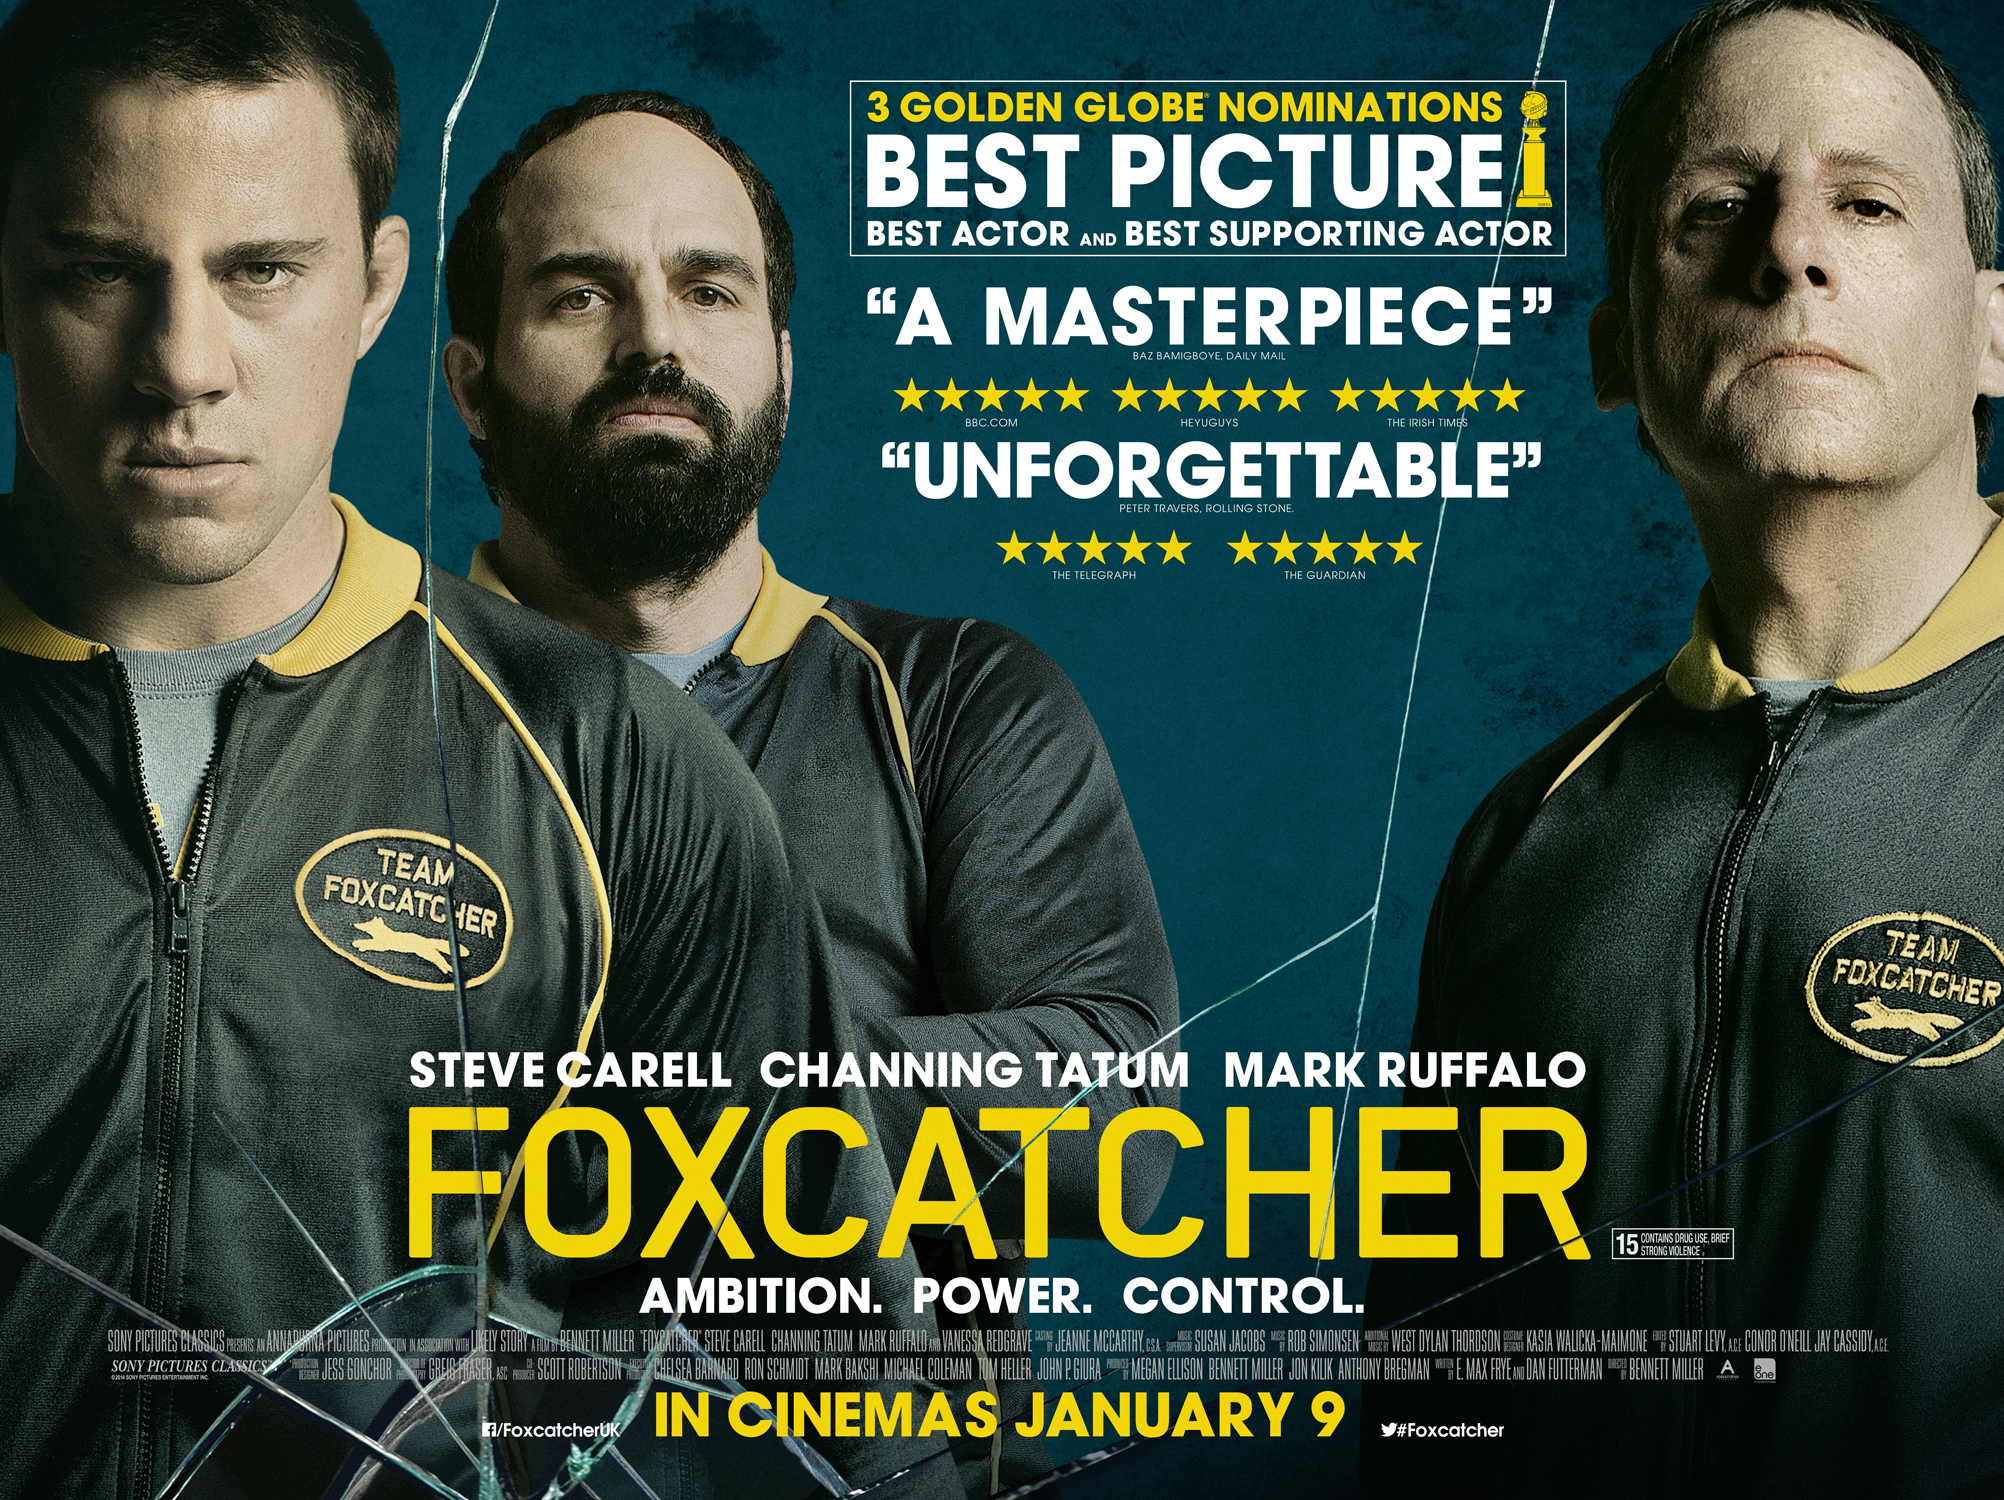 Wrestler Ed Giese Shares Insight on What really happened at the Foxcatcher Farm